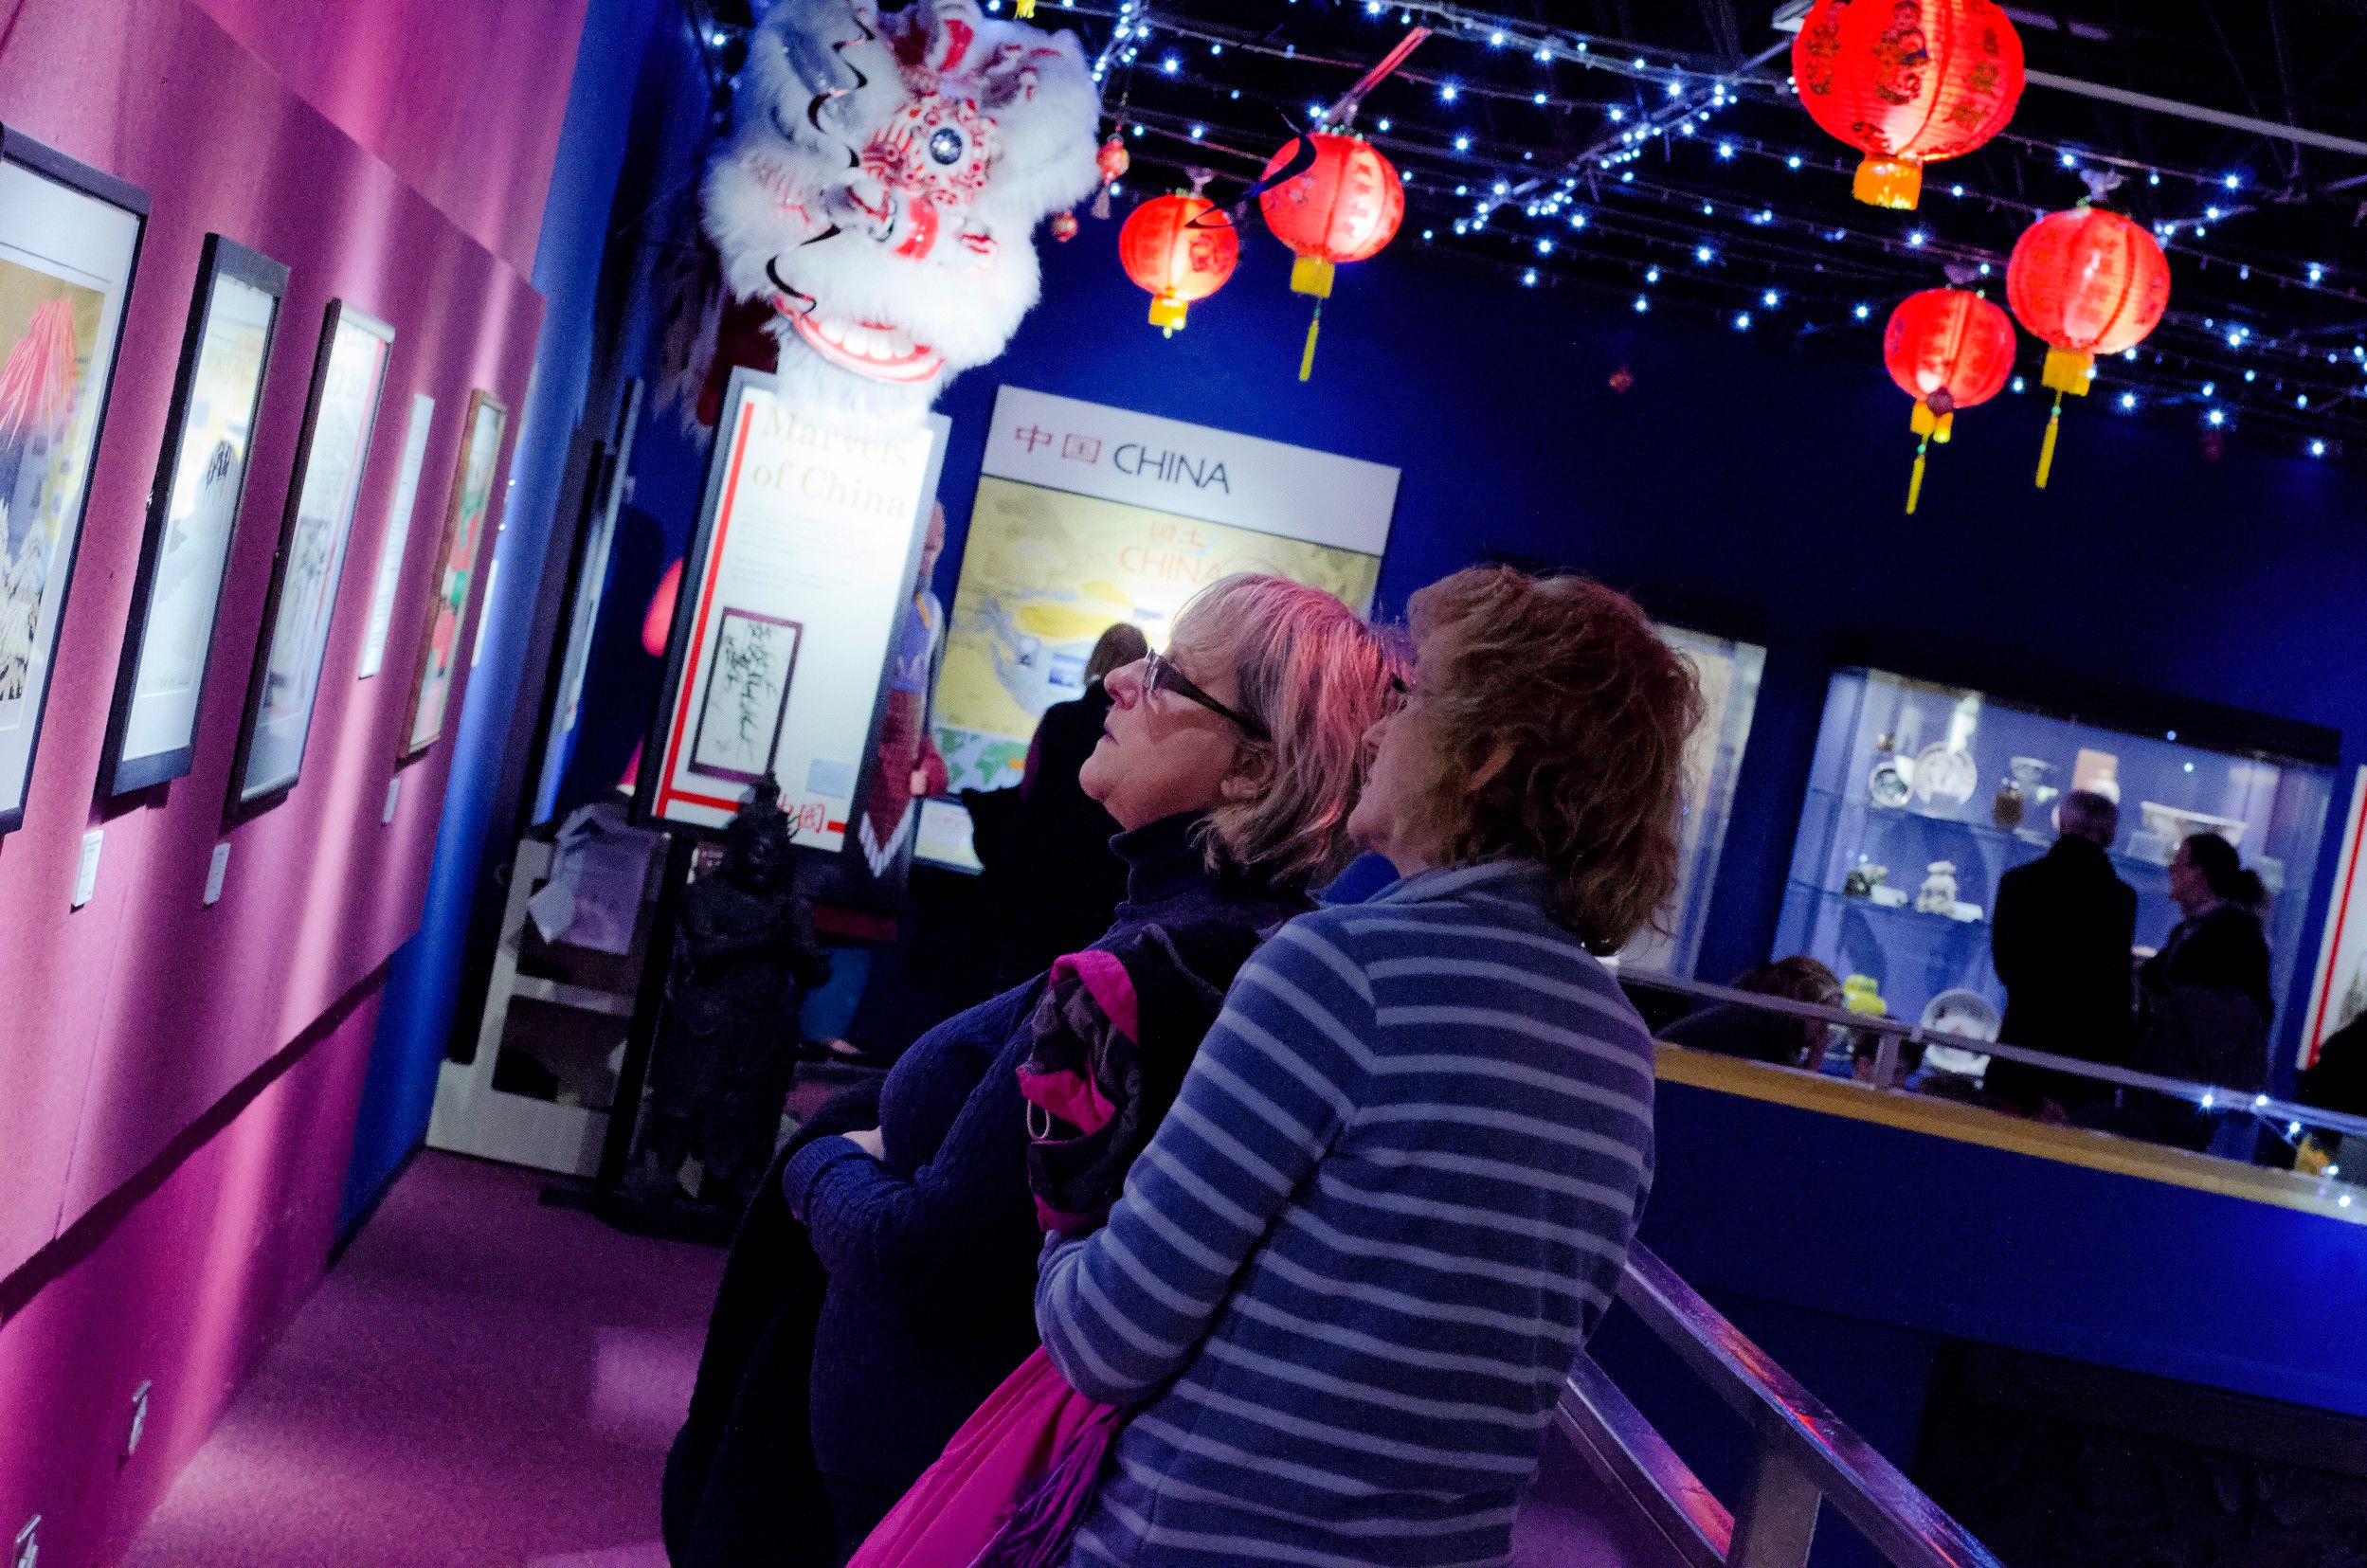 Visitors studying an exhibition in the Chinese wing of the museum.